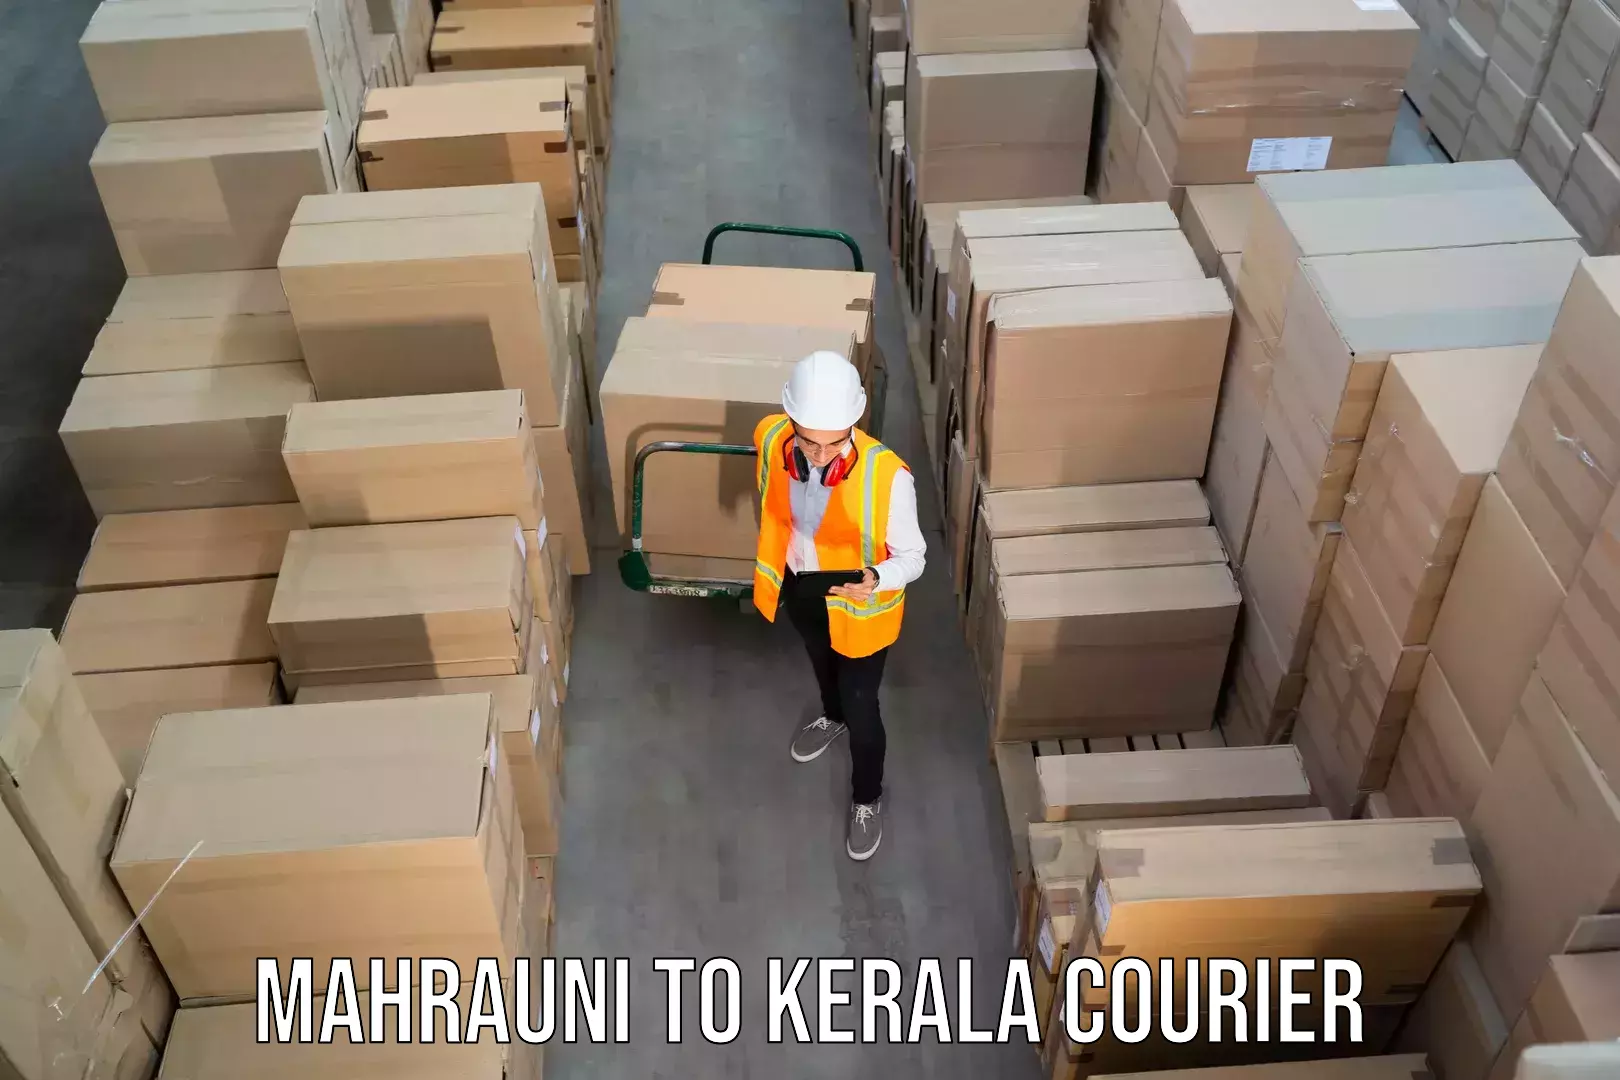 Express delivery solutions Mahrauni to Kerala